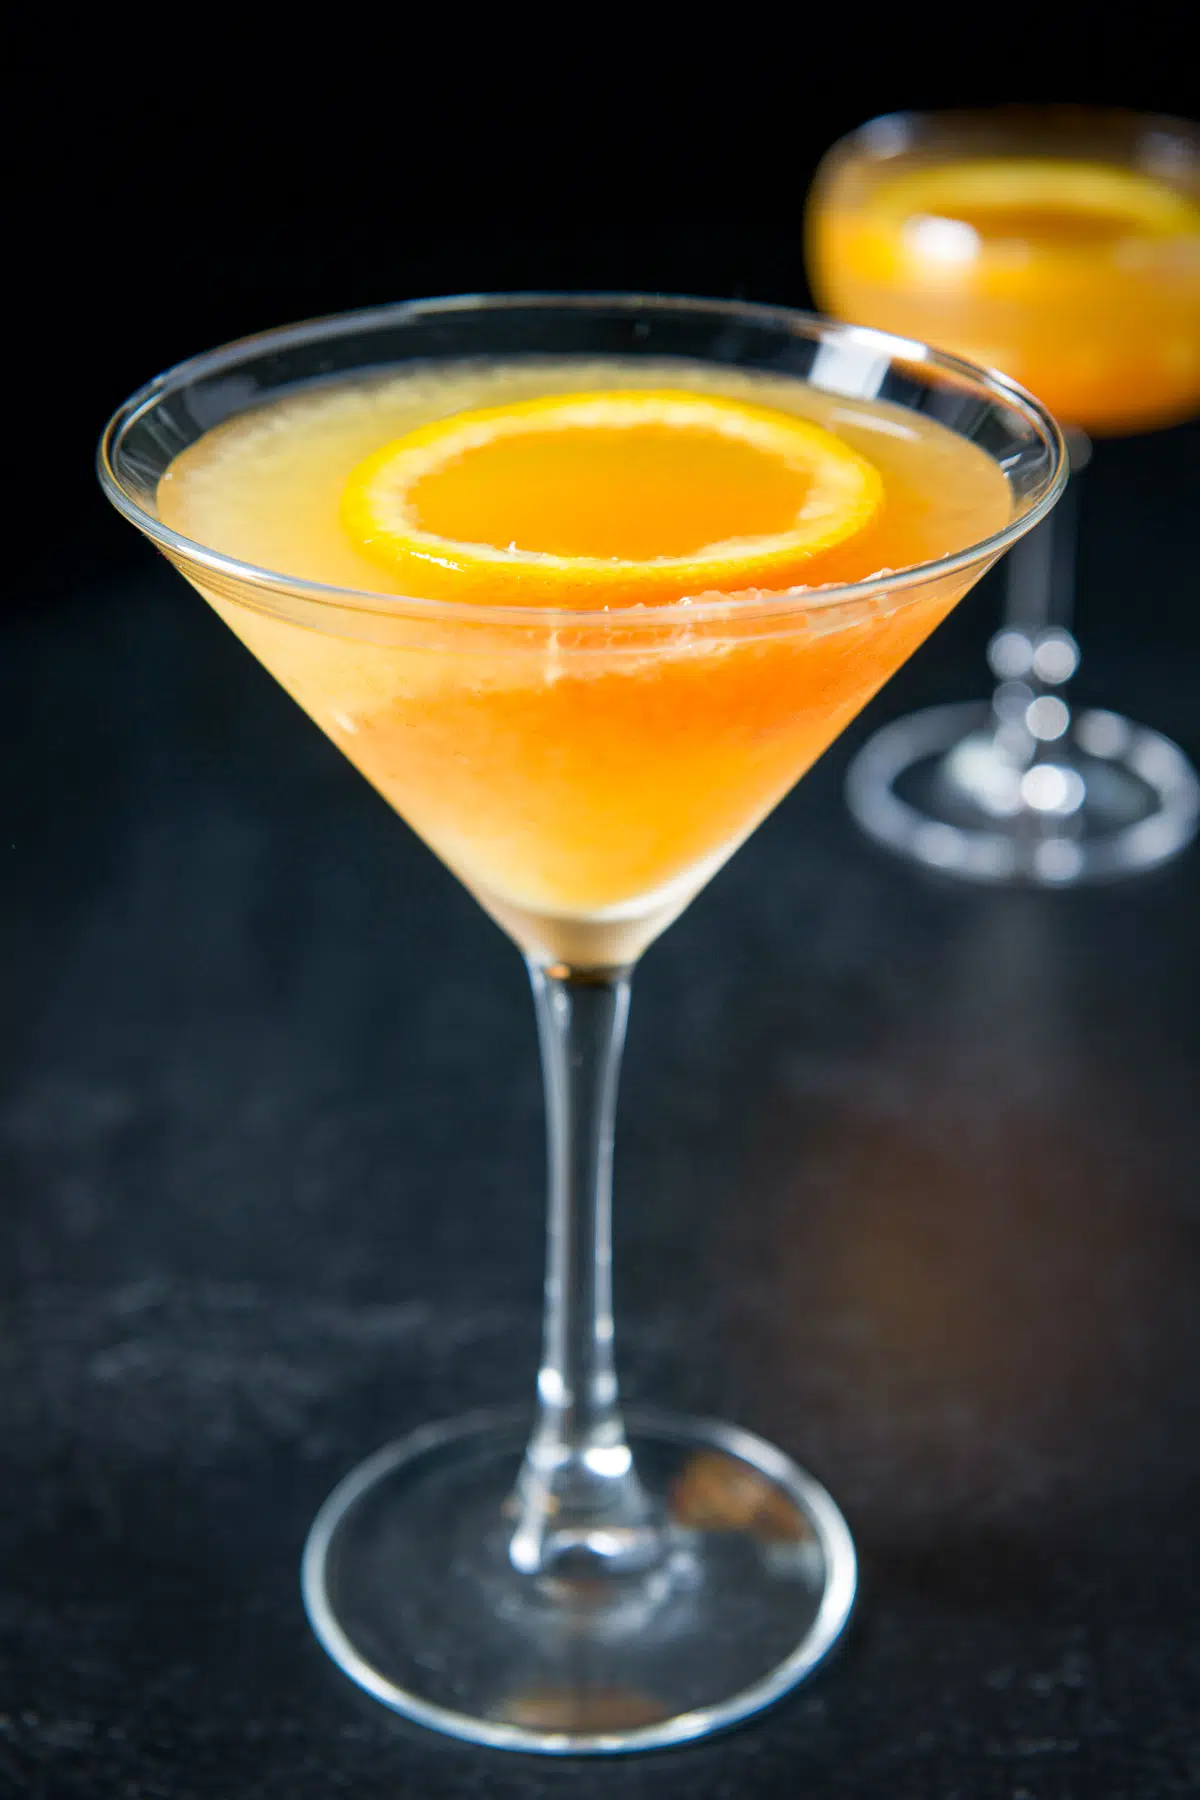 Martini glass with the orange cocktail in it with a coupe glass in the back